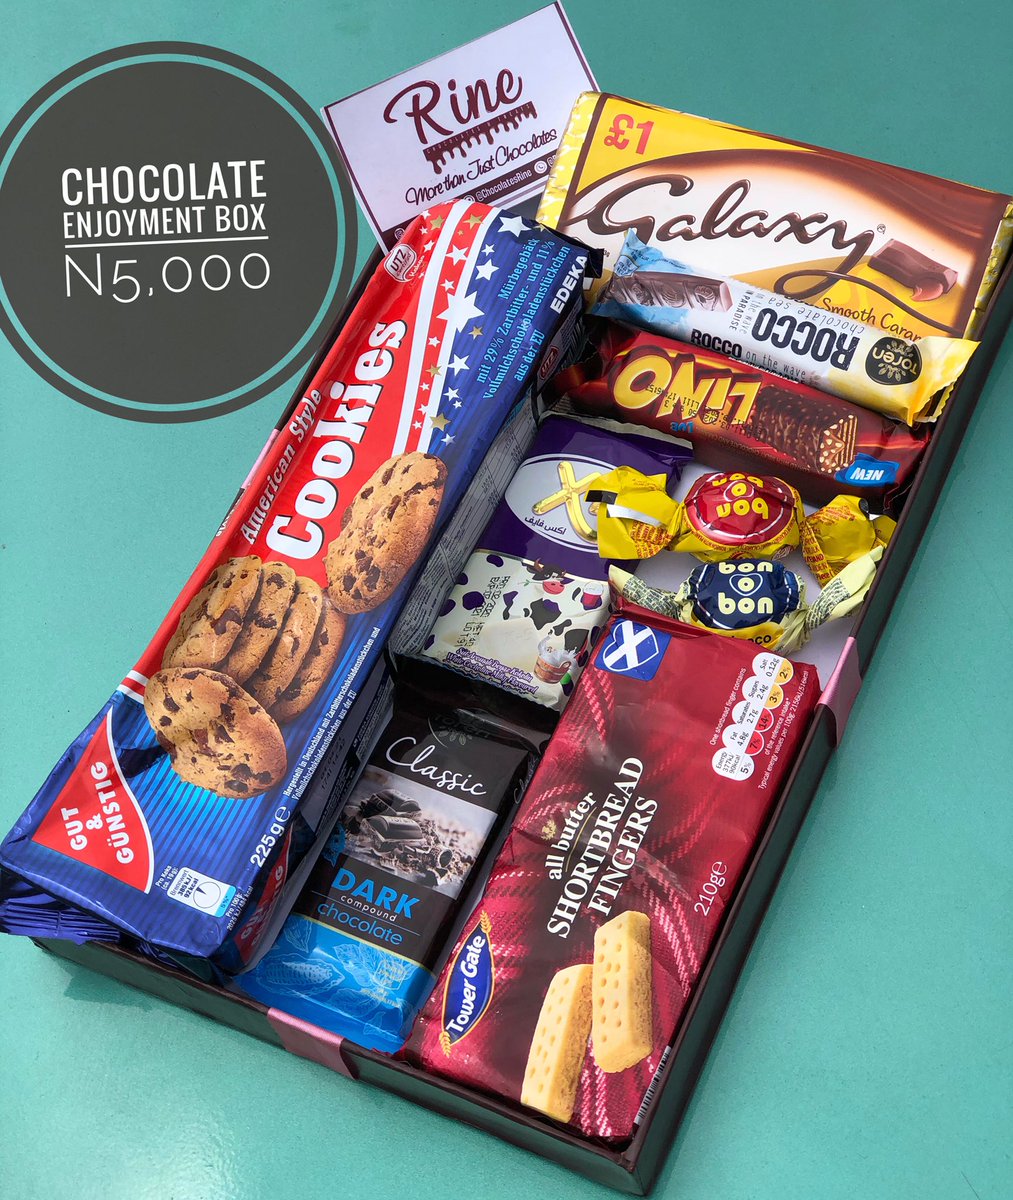 Hey Chocolatey Person!This is our Eat yourself to Enjoyment Box.It is worth N5,000 and can be curated to suit your preference.It is readily available for delivery or pickup upon order for personal enjoyment and a treat for loved ones.Lots of chocolates,Rine.